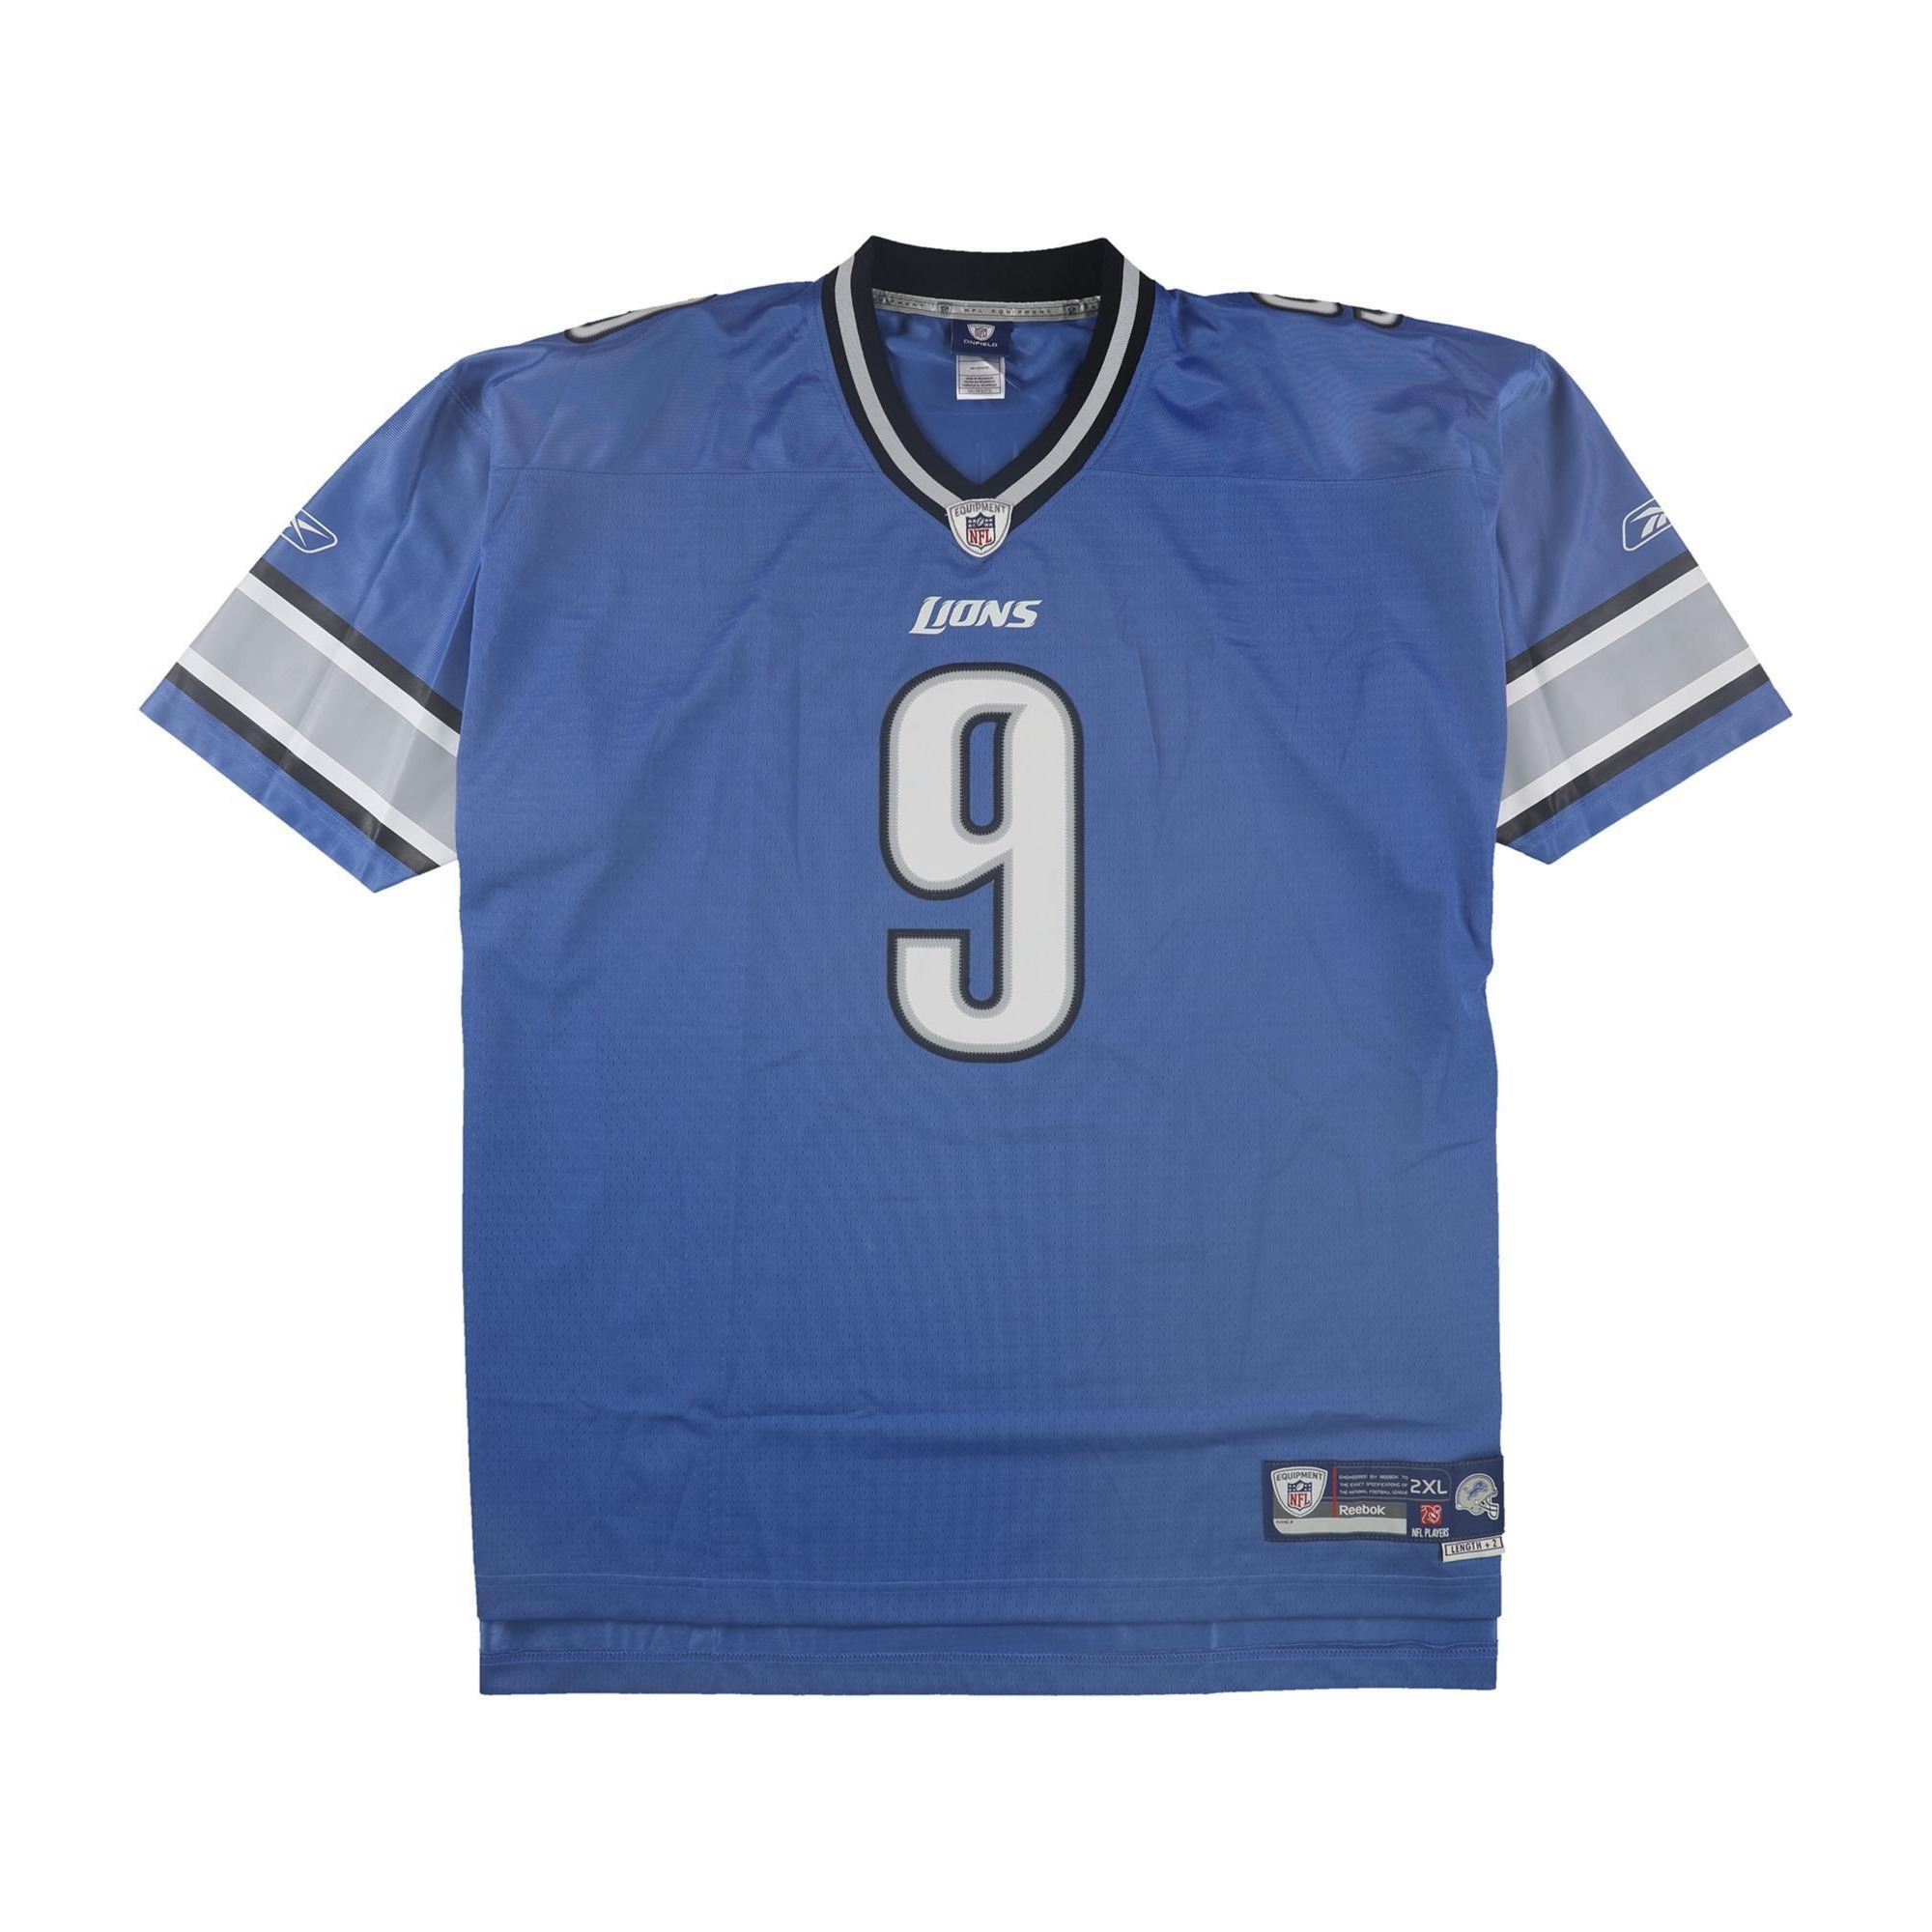 ONFIELD Mens Detroit Lions #9 Jersey, Style # 7048A-1